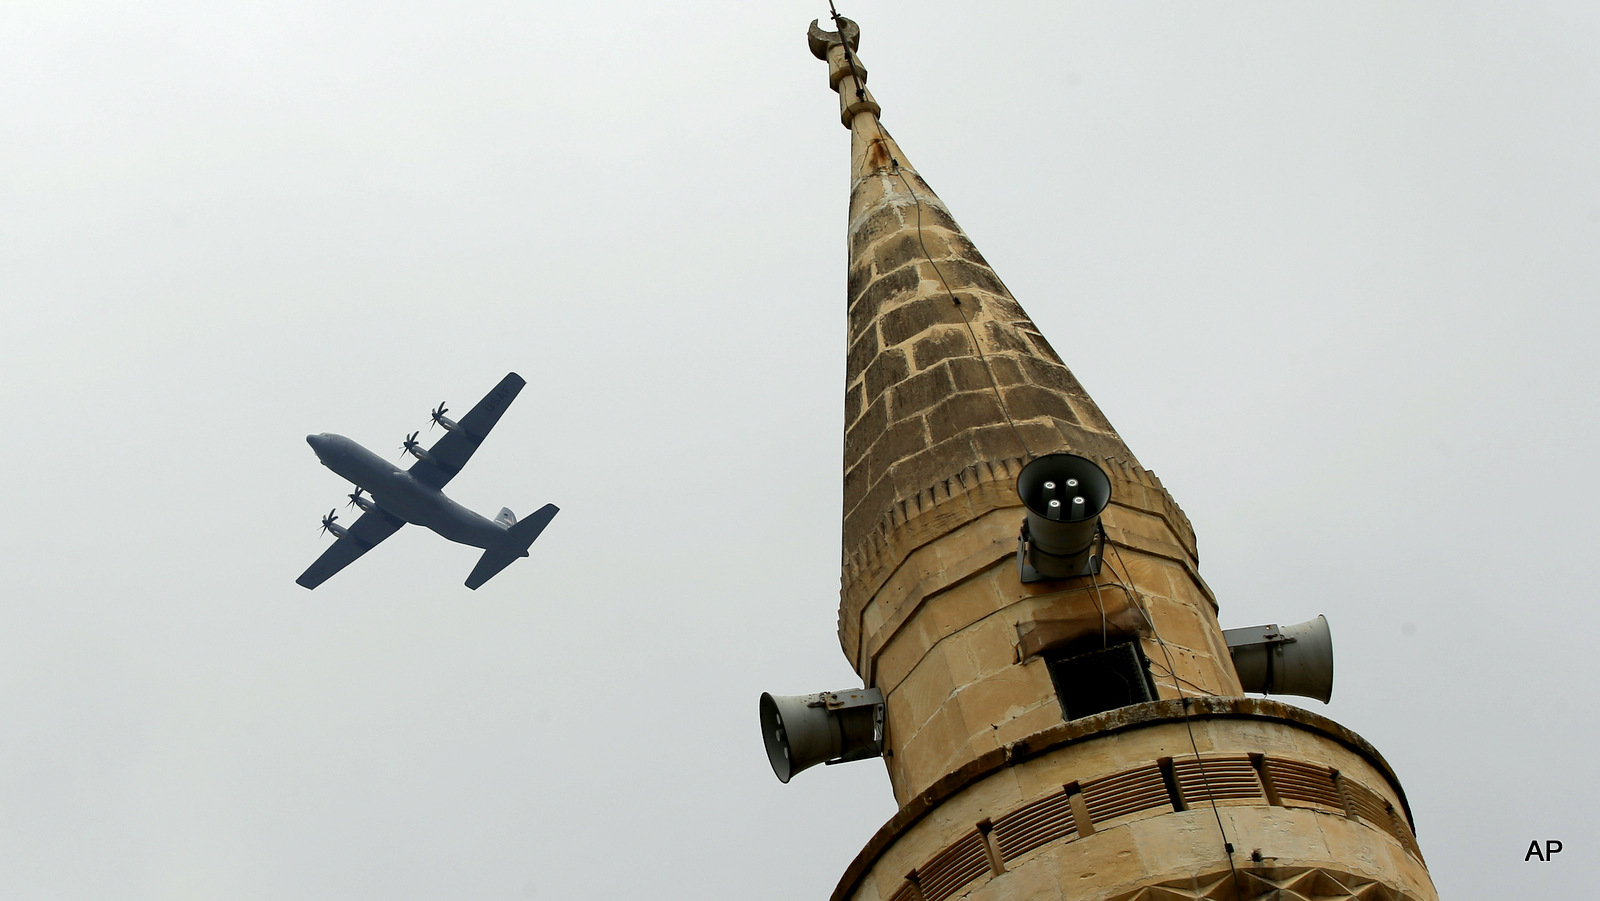 With a mosque's minaret in the foreground, a United States Air Force cargo plane takes off from the Incirlik Air Base in southern Turkey, where coalition forces launch attacks inside of Syria, July 30, 2015.